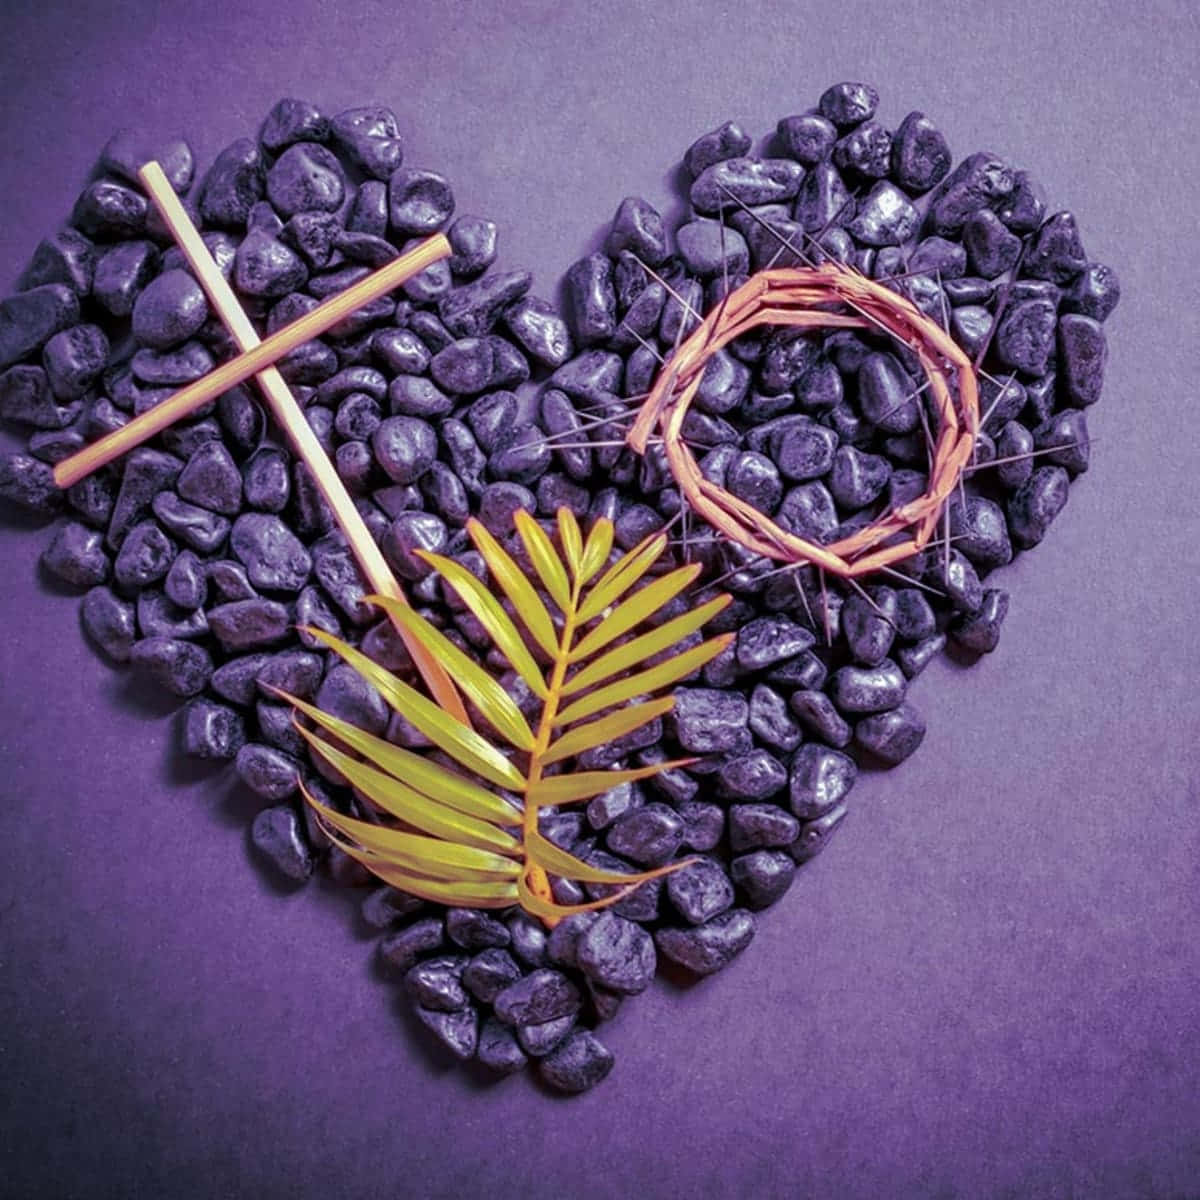 "Living out Lent: A time for reflection and spiritual renewal"